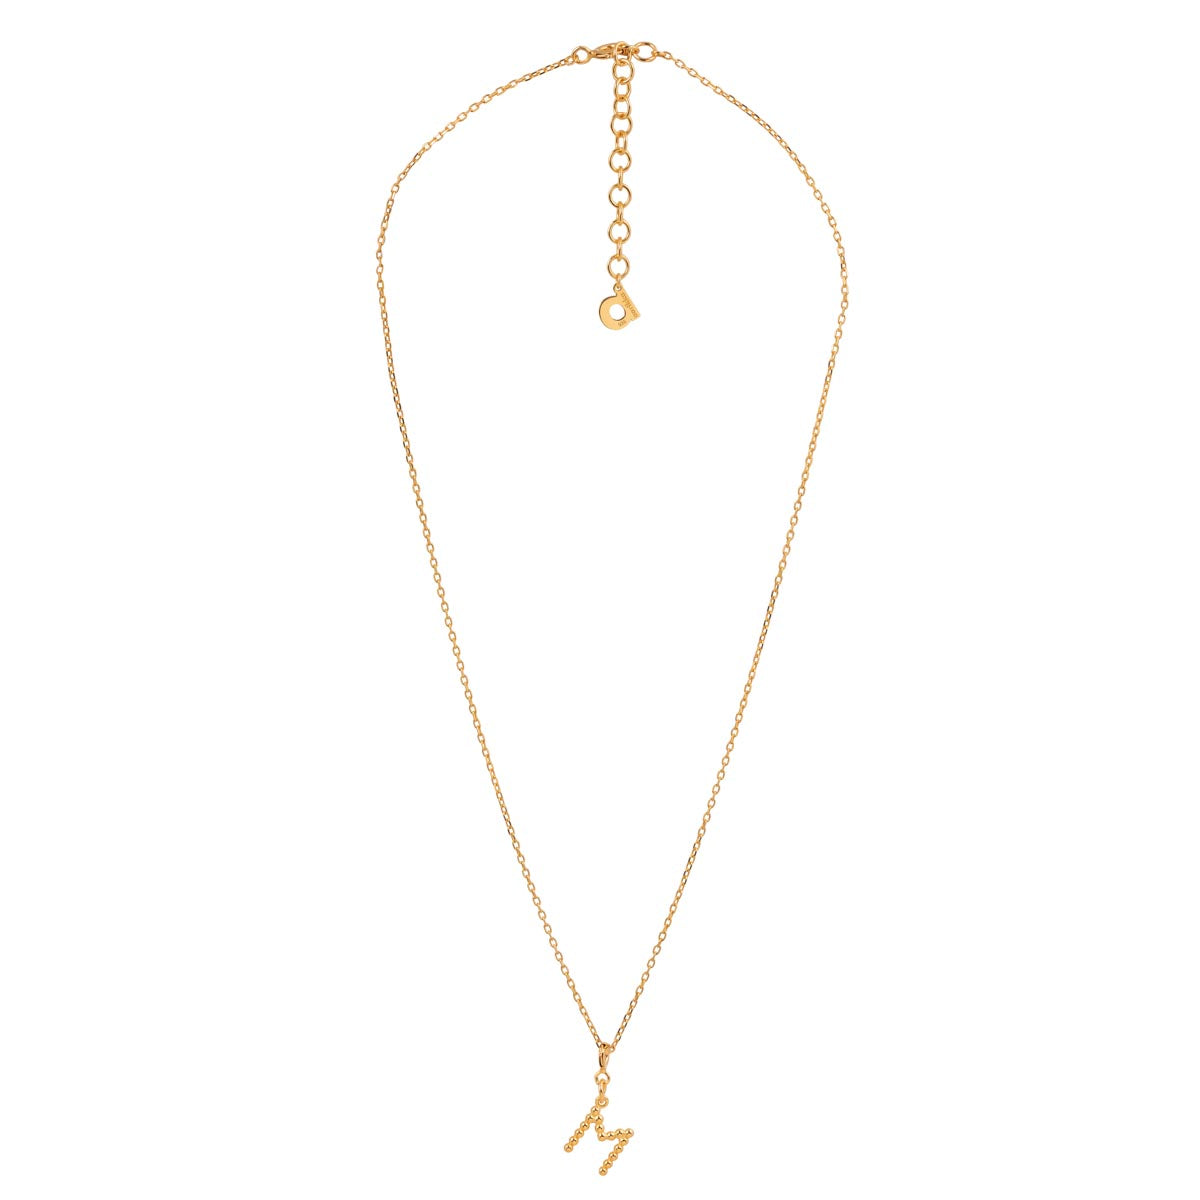 Yllätys Monogram Necklace M, gold-plated silver